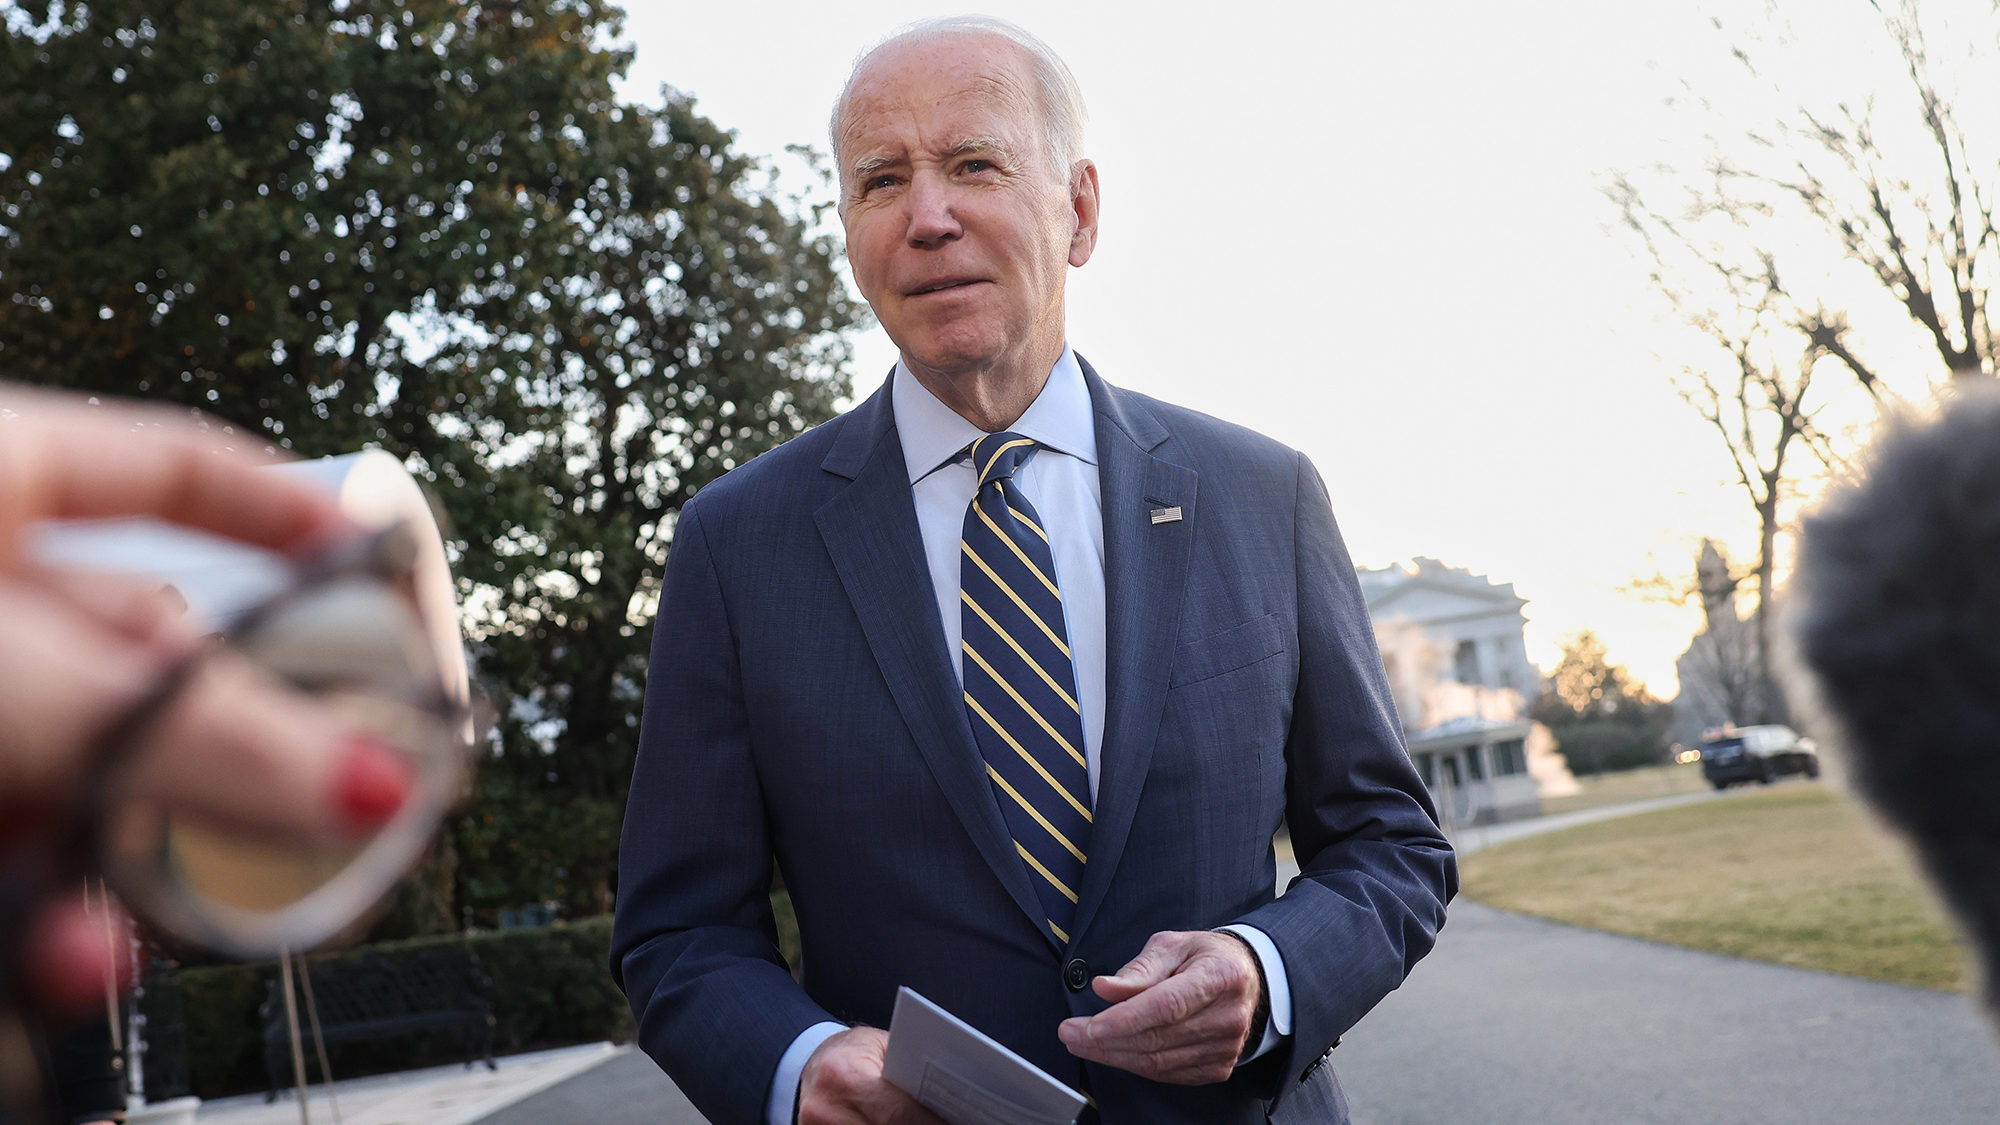 President Joe Biden's aides located documents with classified markings at two locations inside his ...